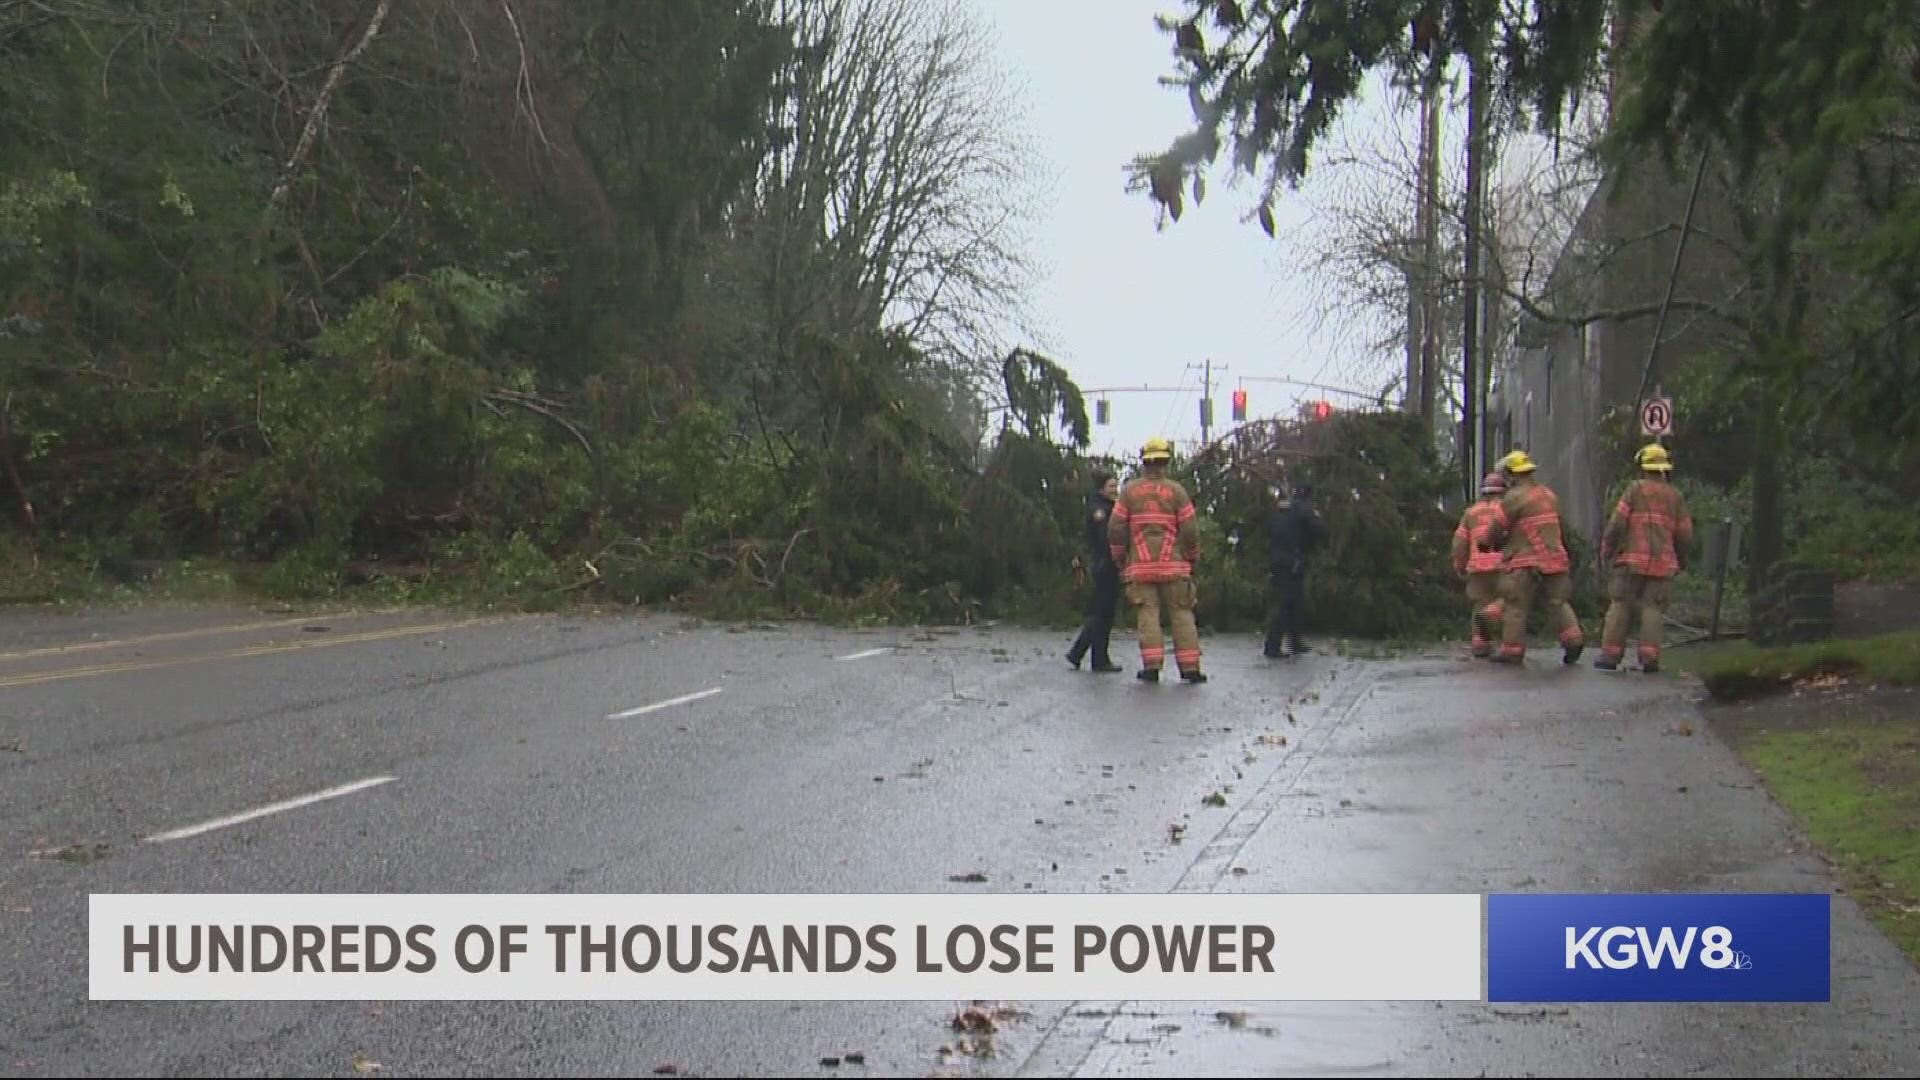 At the peak of the power outages on Tuesday, over 150,000 Oregonians were without electricity. A storm brought powerful winds, knocking down trees and power lines.